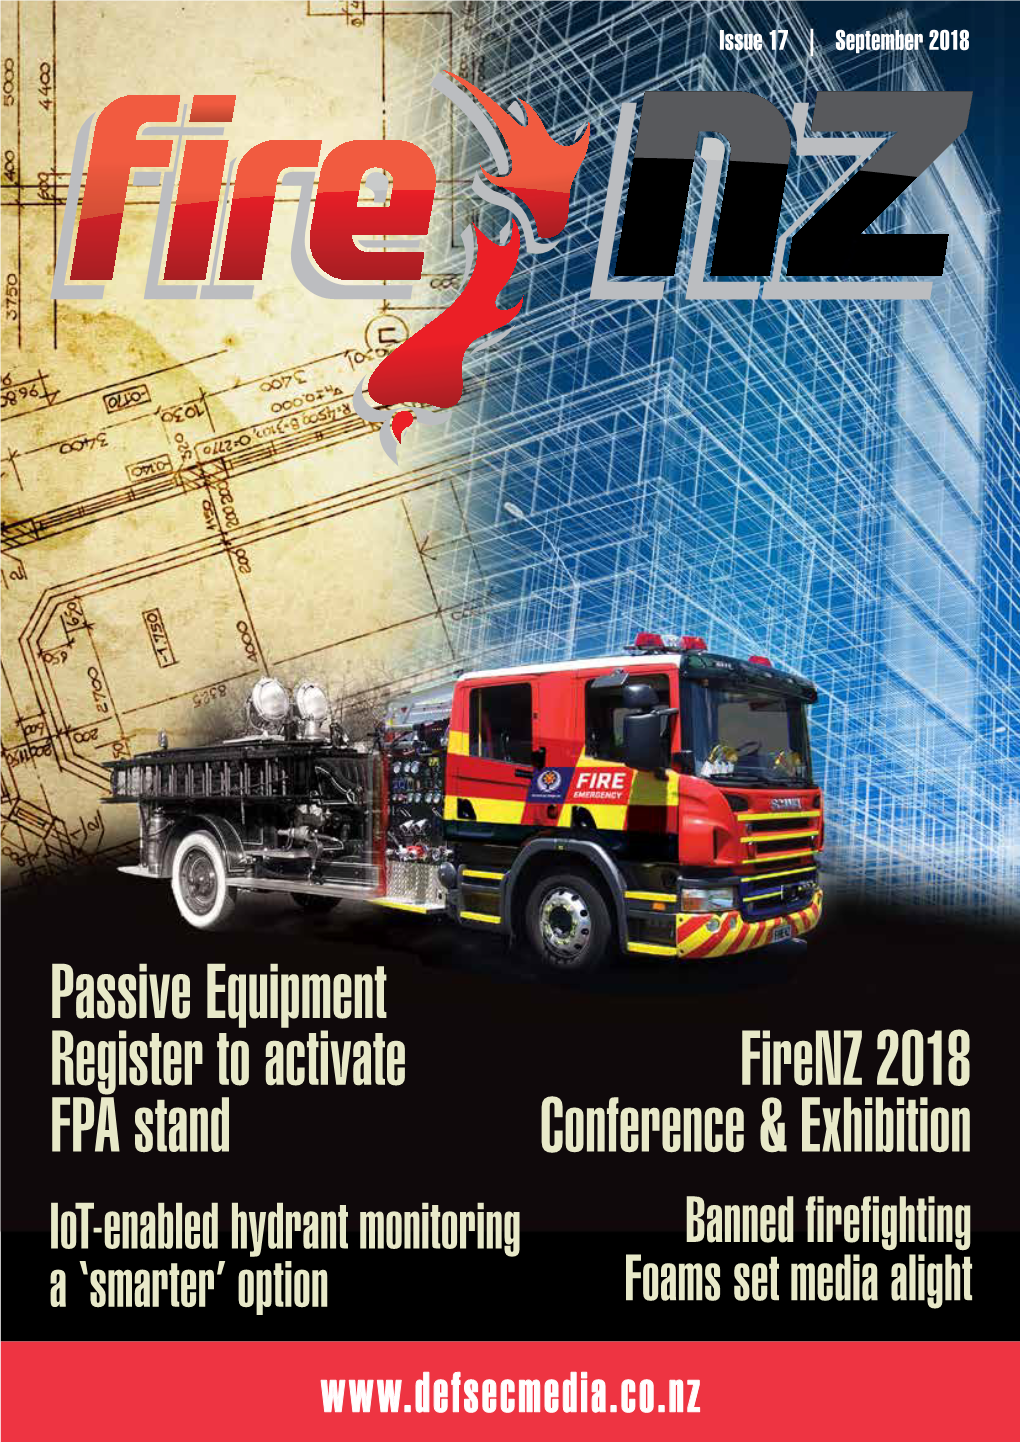 Firenz 2018 Conference & Exhibition